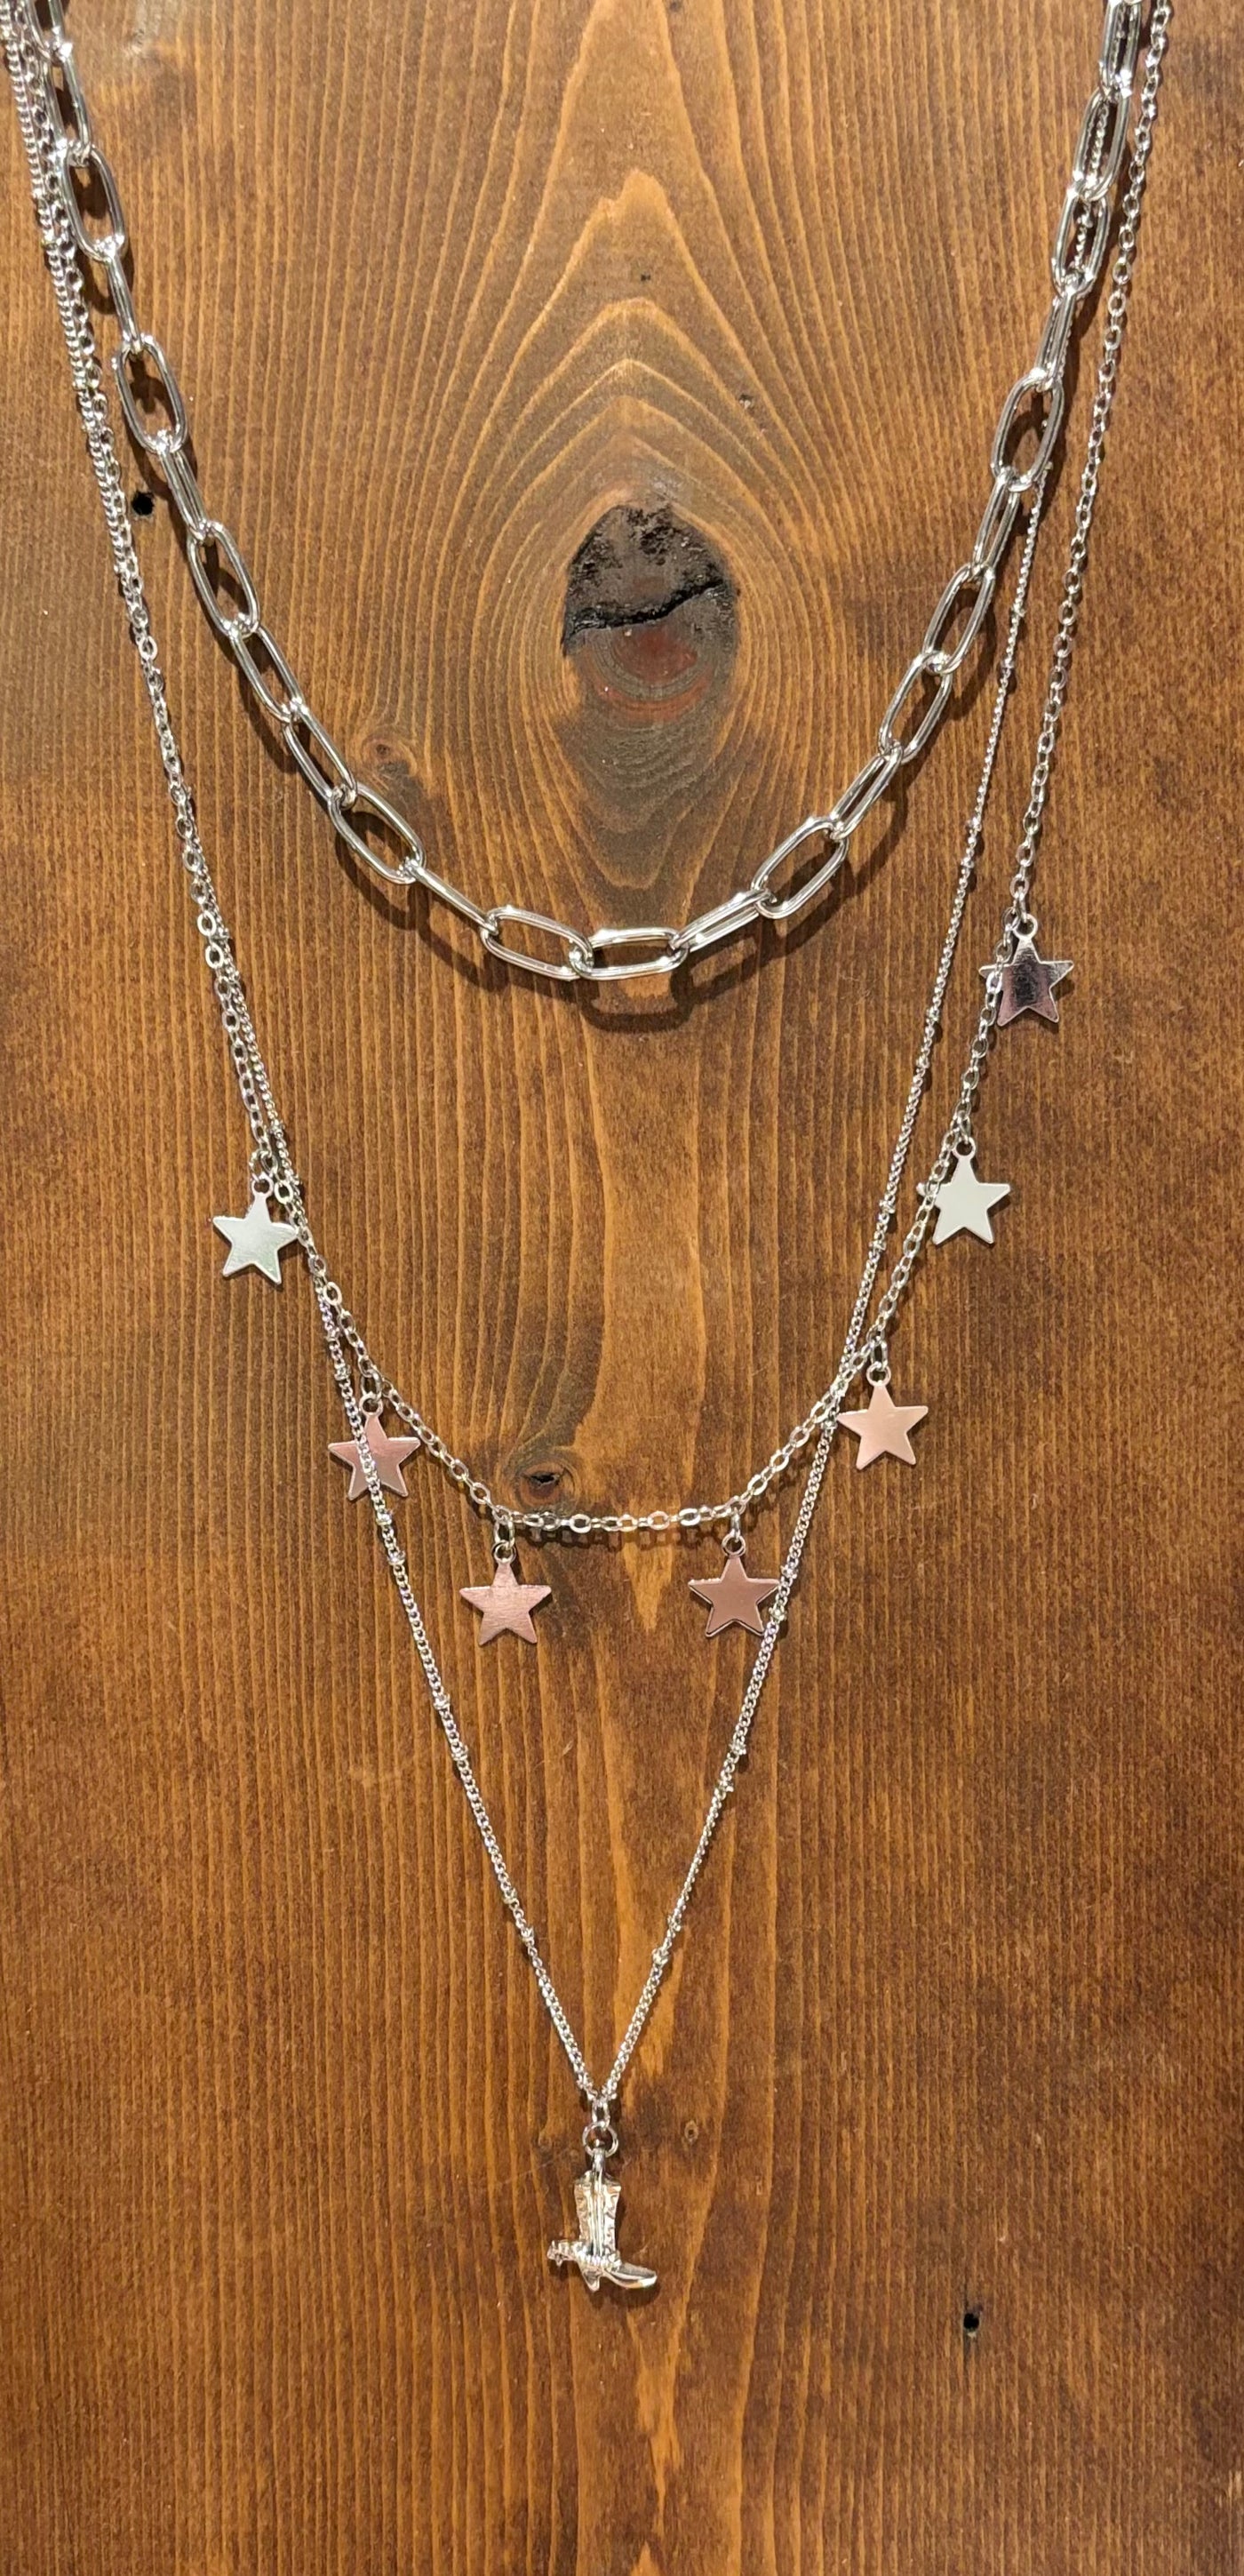 Stars and Cowboy Boot Chain Necklace